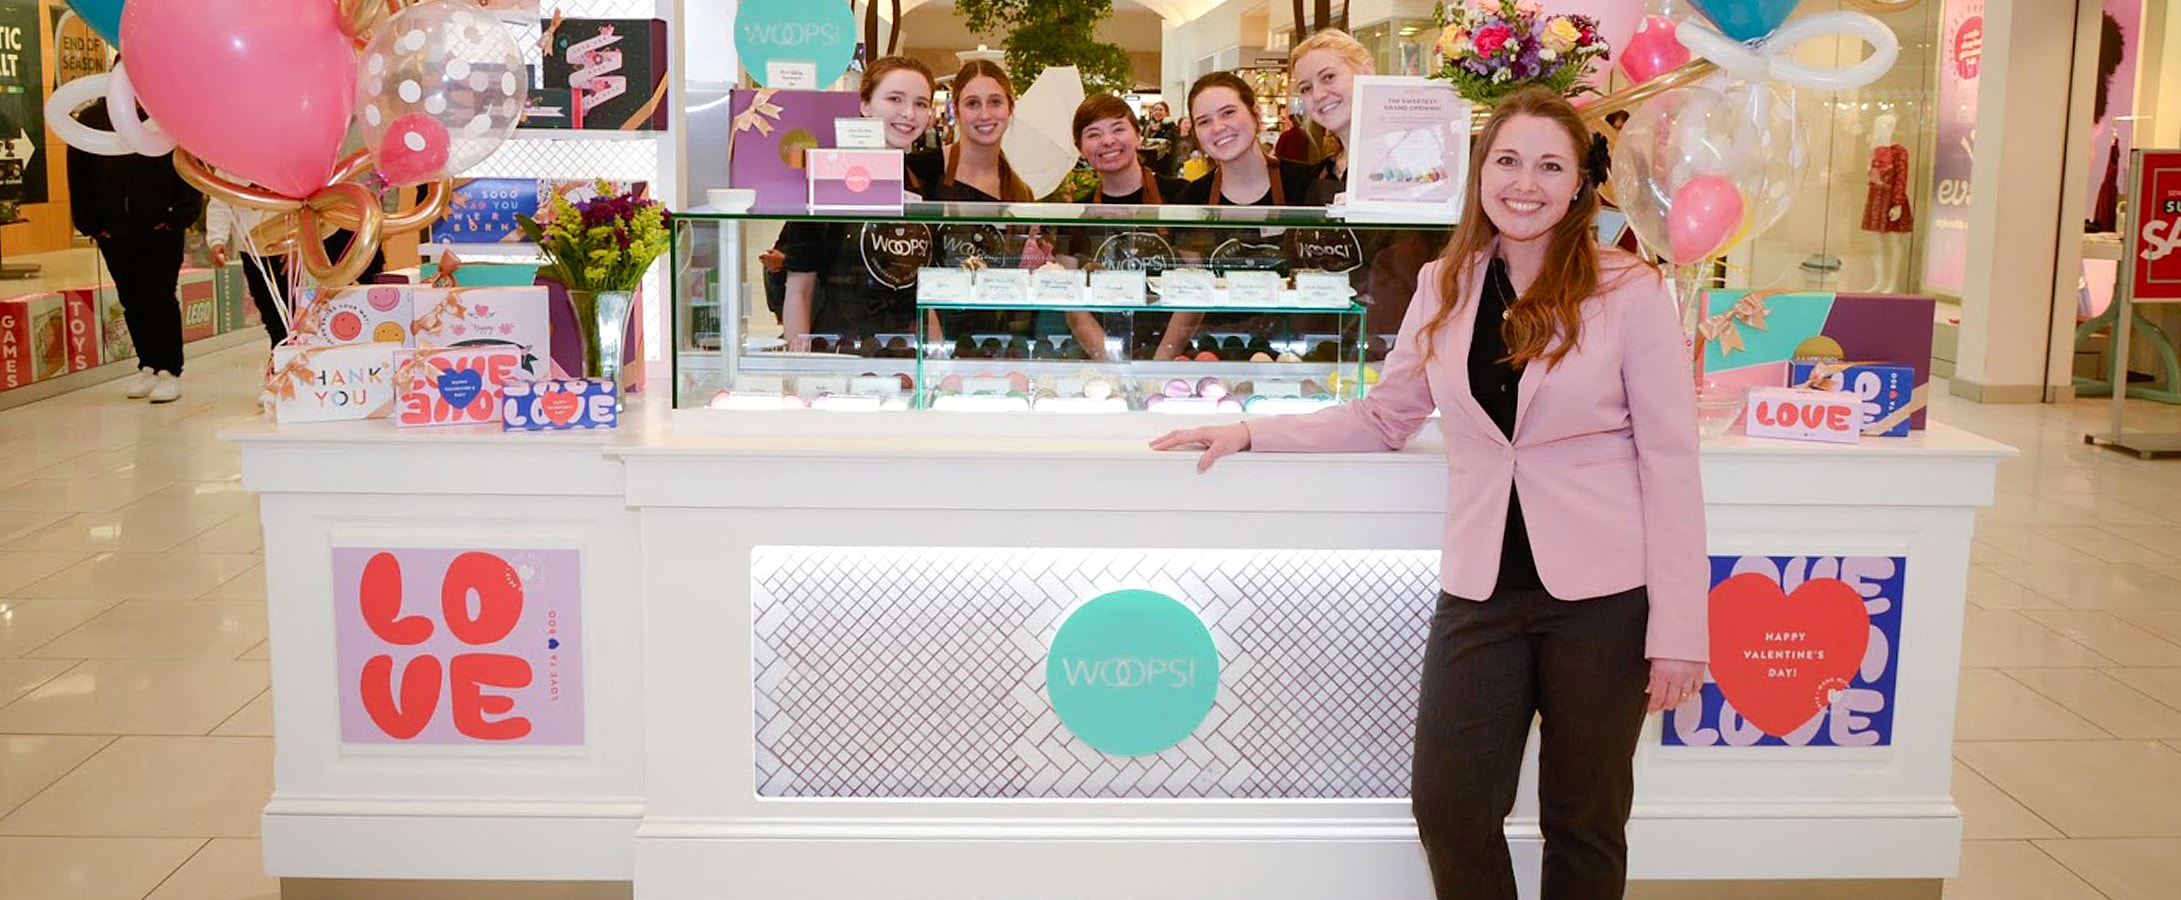 A woman standing in front of a Woops! Kiosk full of assorted macarons, balloons, and macaron boxes. Behind the counter are multiple smiling women.